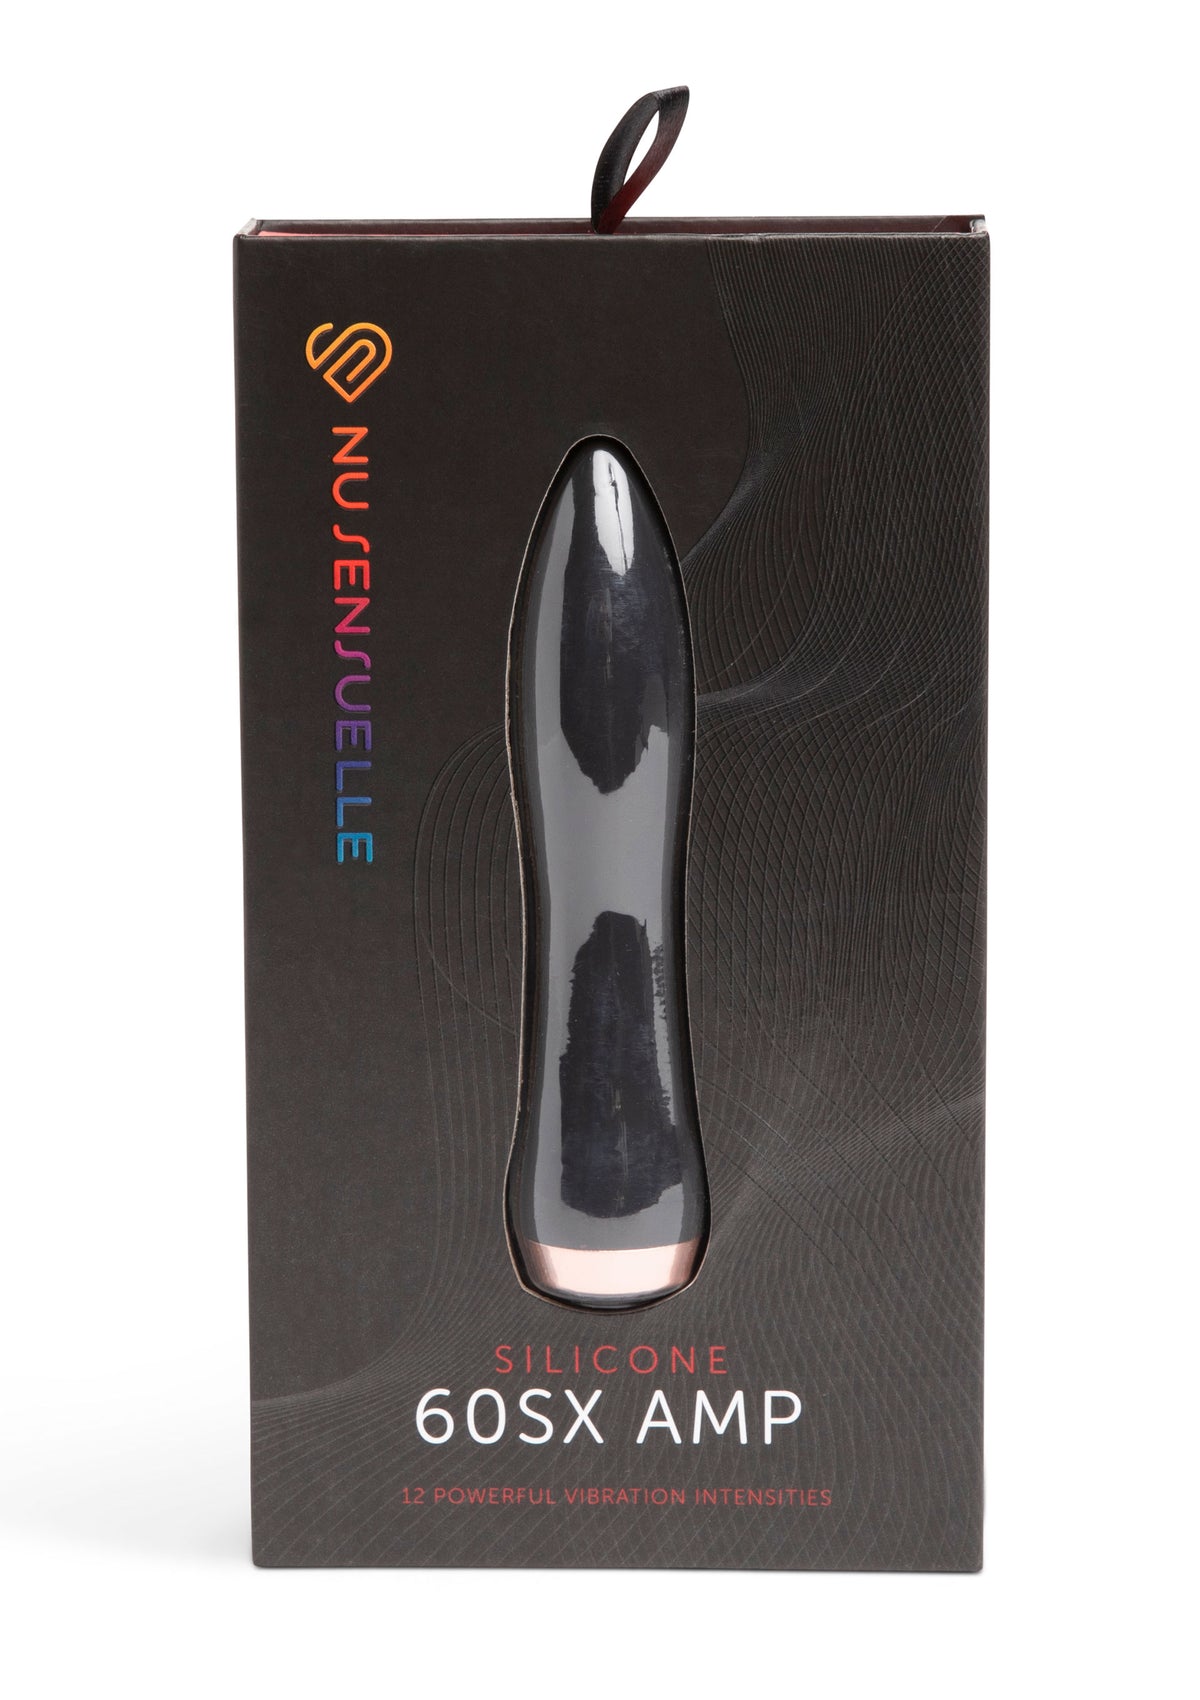 Silicone 60SX AMP Bullet